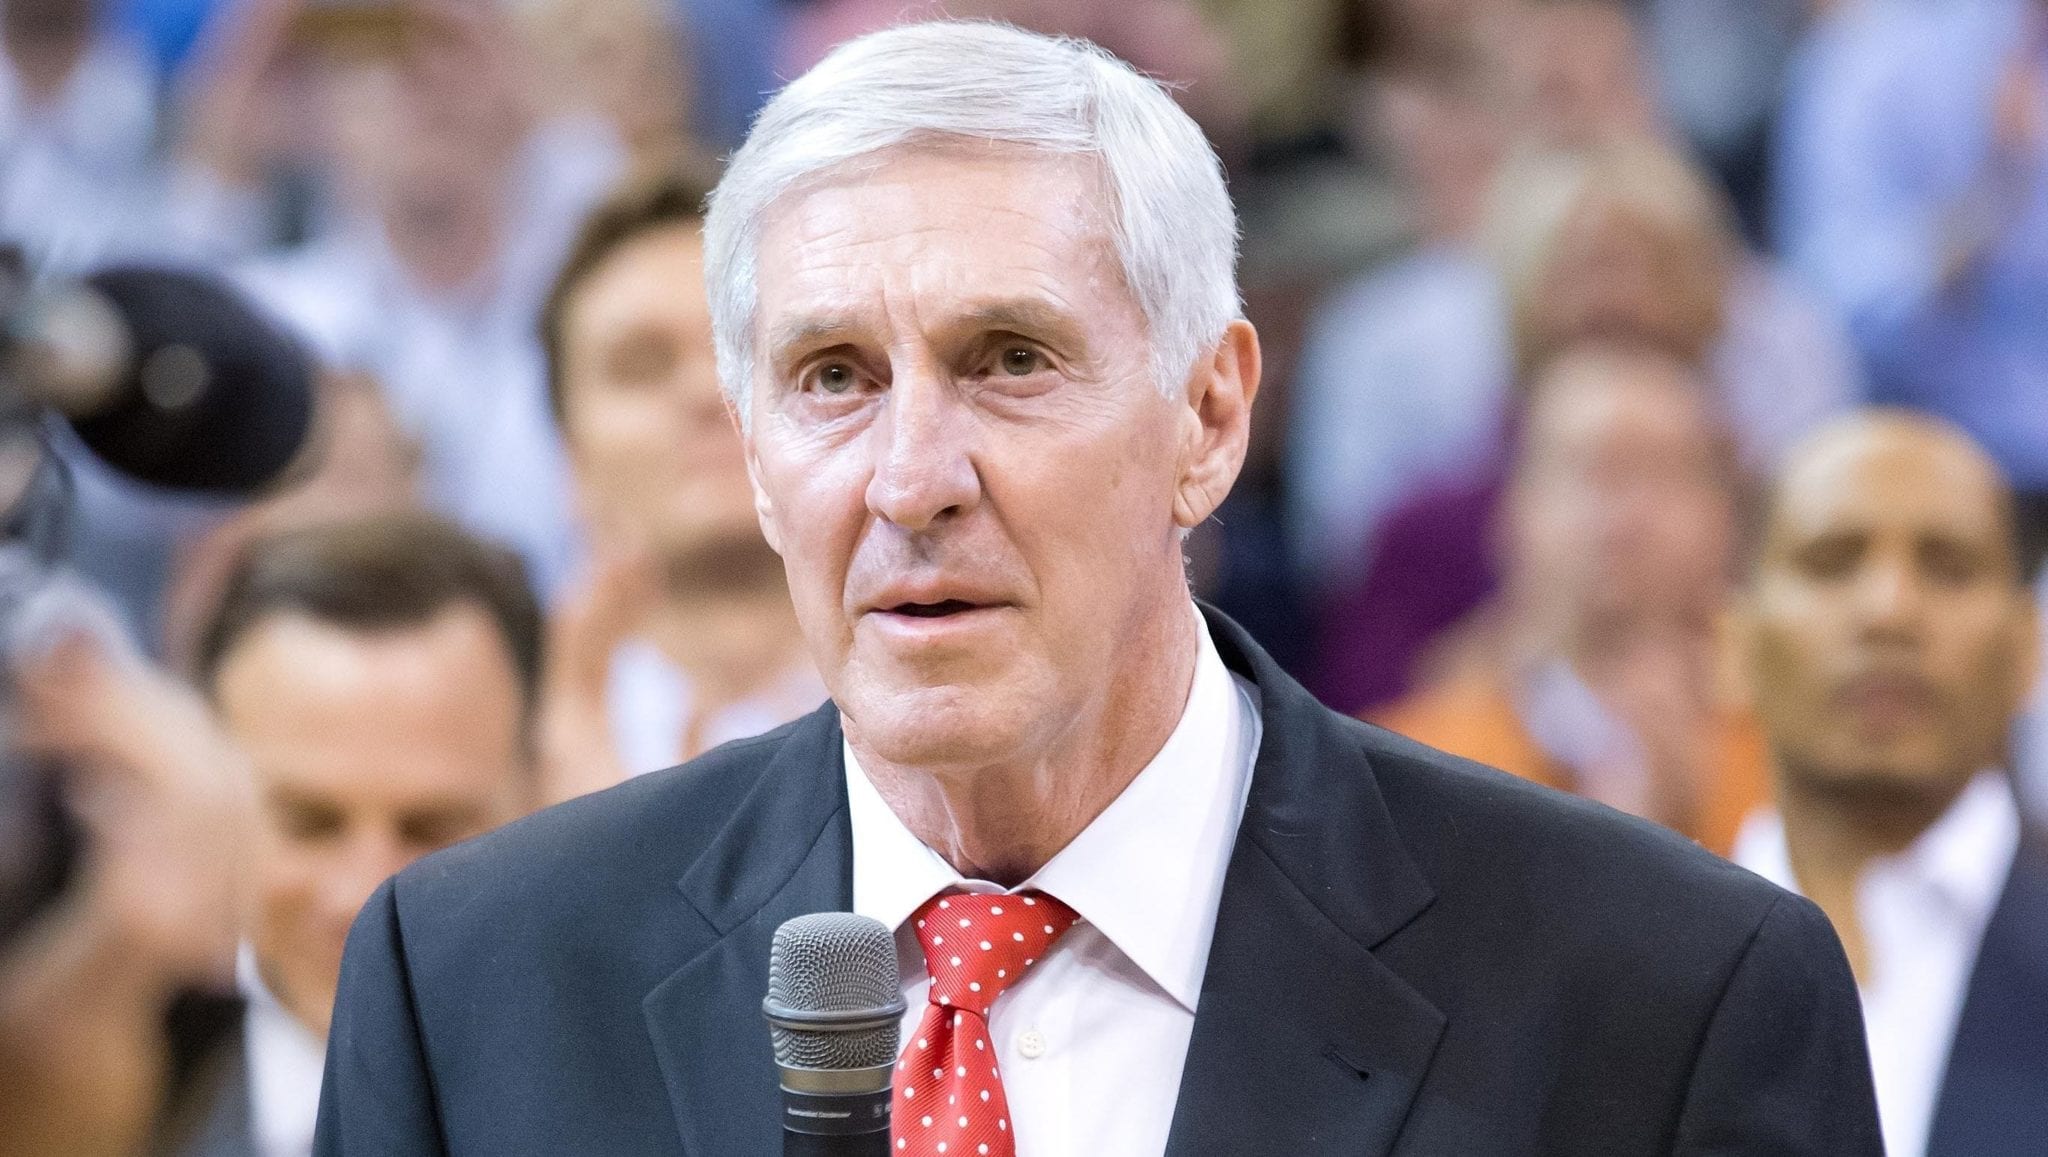 Hall of Fame coach Jerry Sloan Passes away at the age of 78